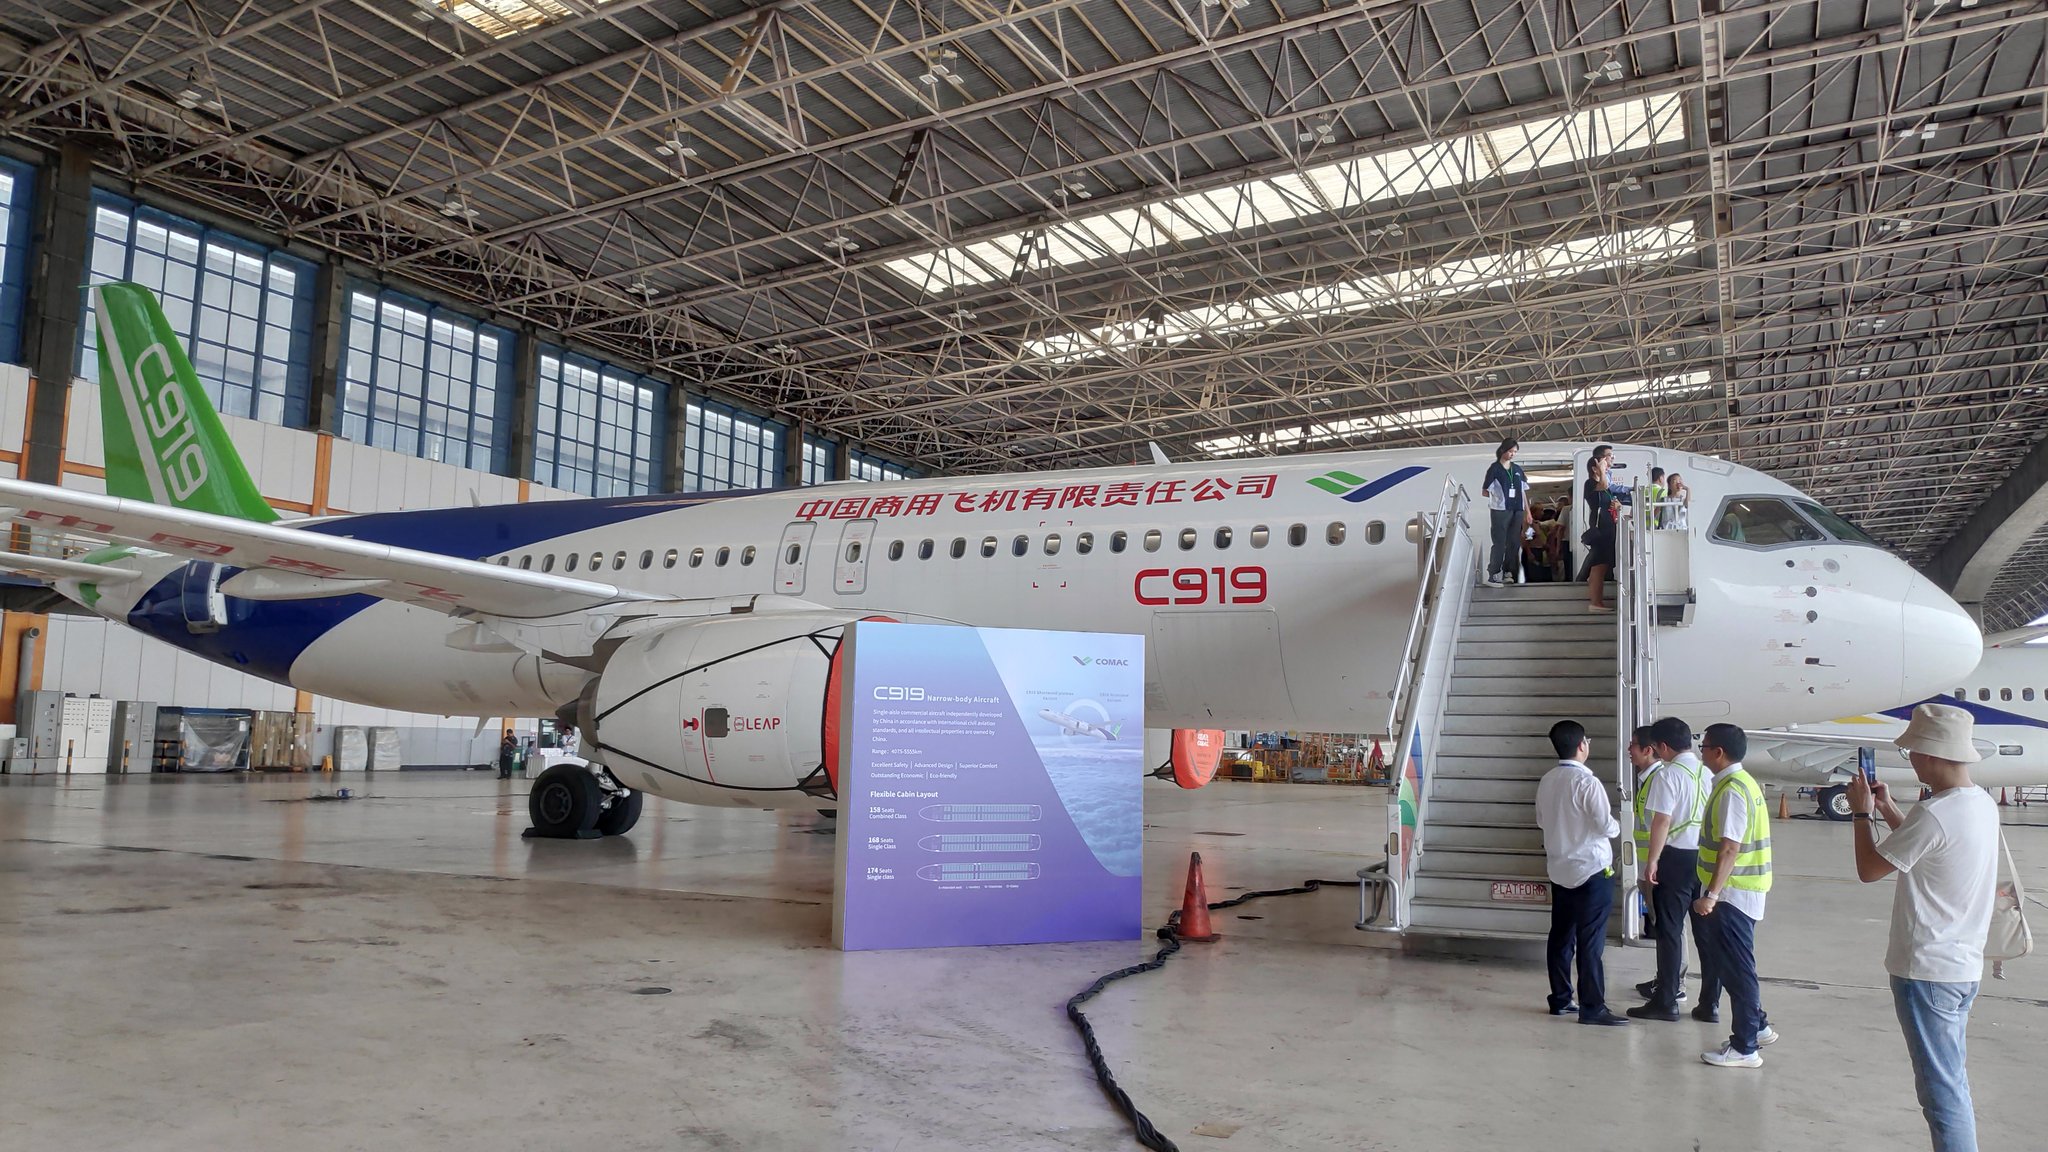 Air China Confirms $10.8 Billion Purchase of 100  Comac C919 Aircraft In a Boost to Chinese Domestic Development.